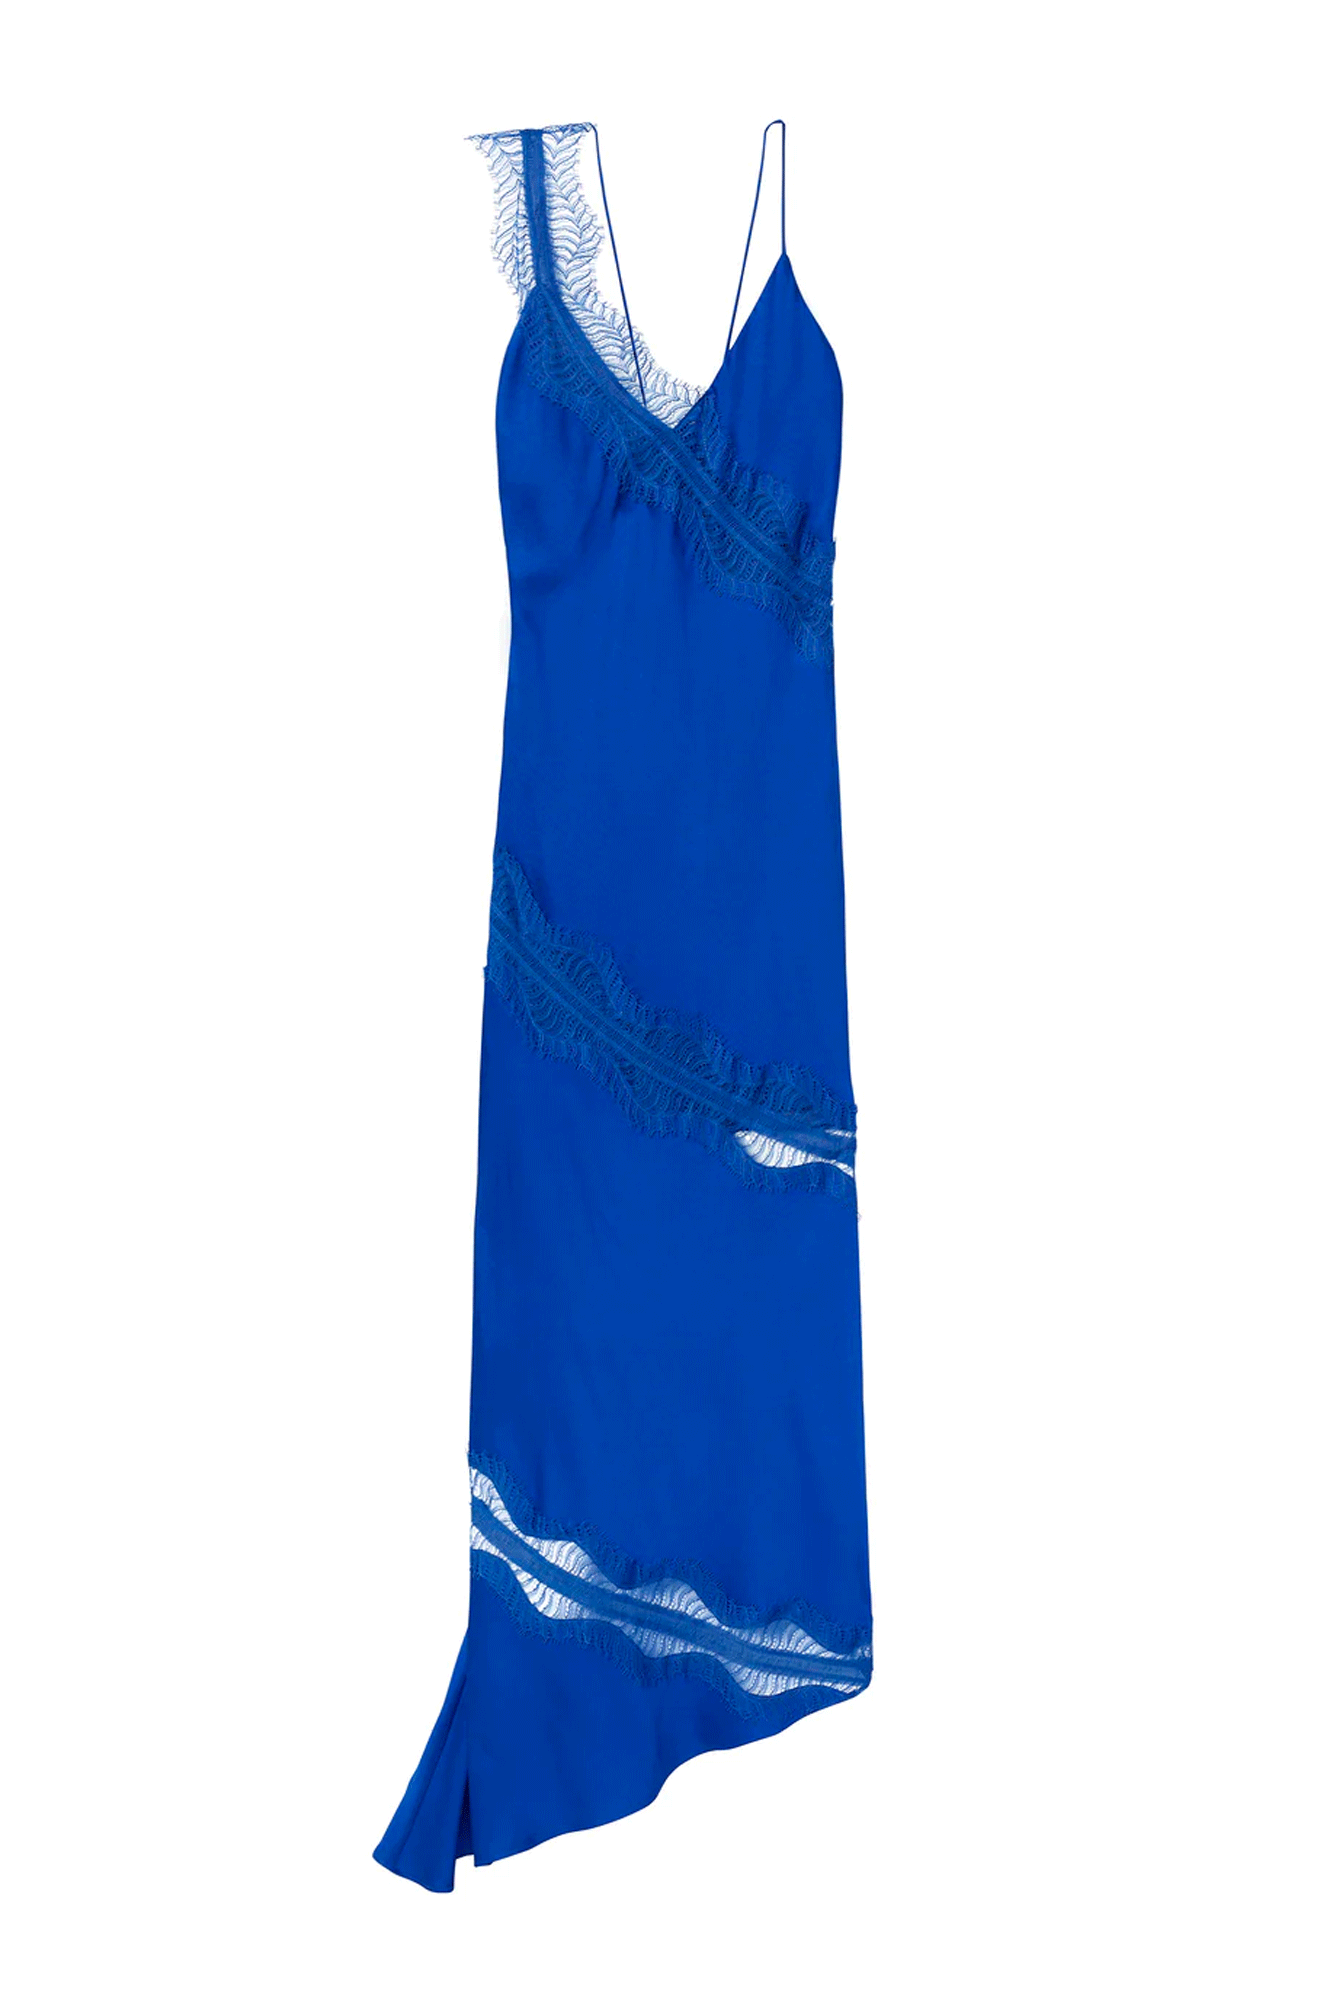 Make a statement in the Soleil Dress from A.L.C. Crafted from a light and fluid silky fabric in a vivid cobalt blue hue, 